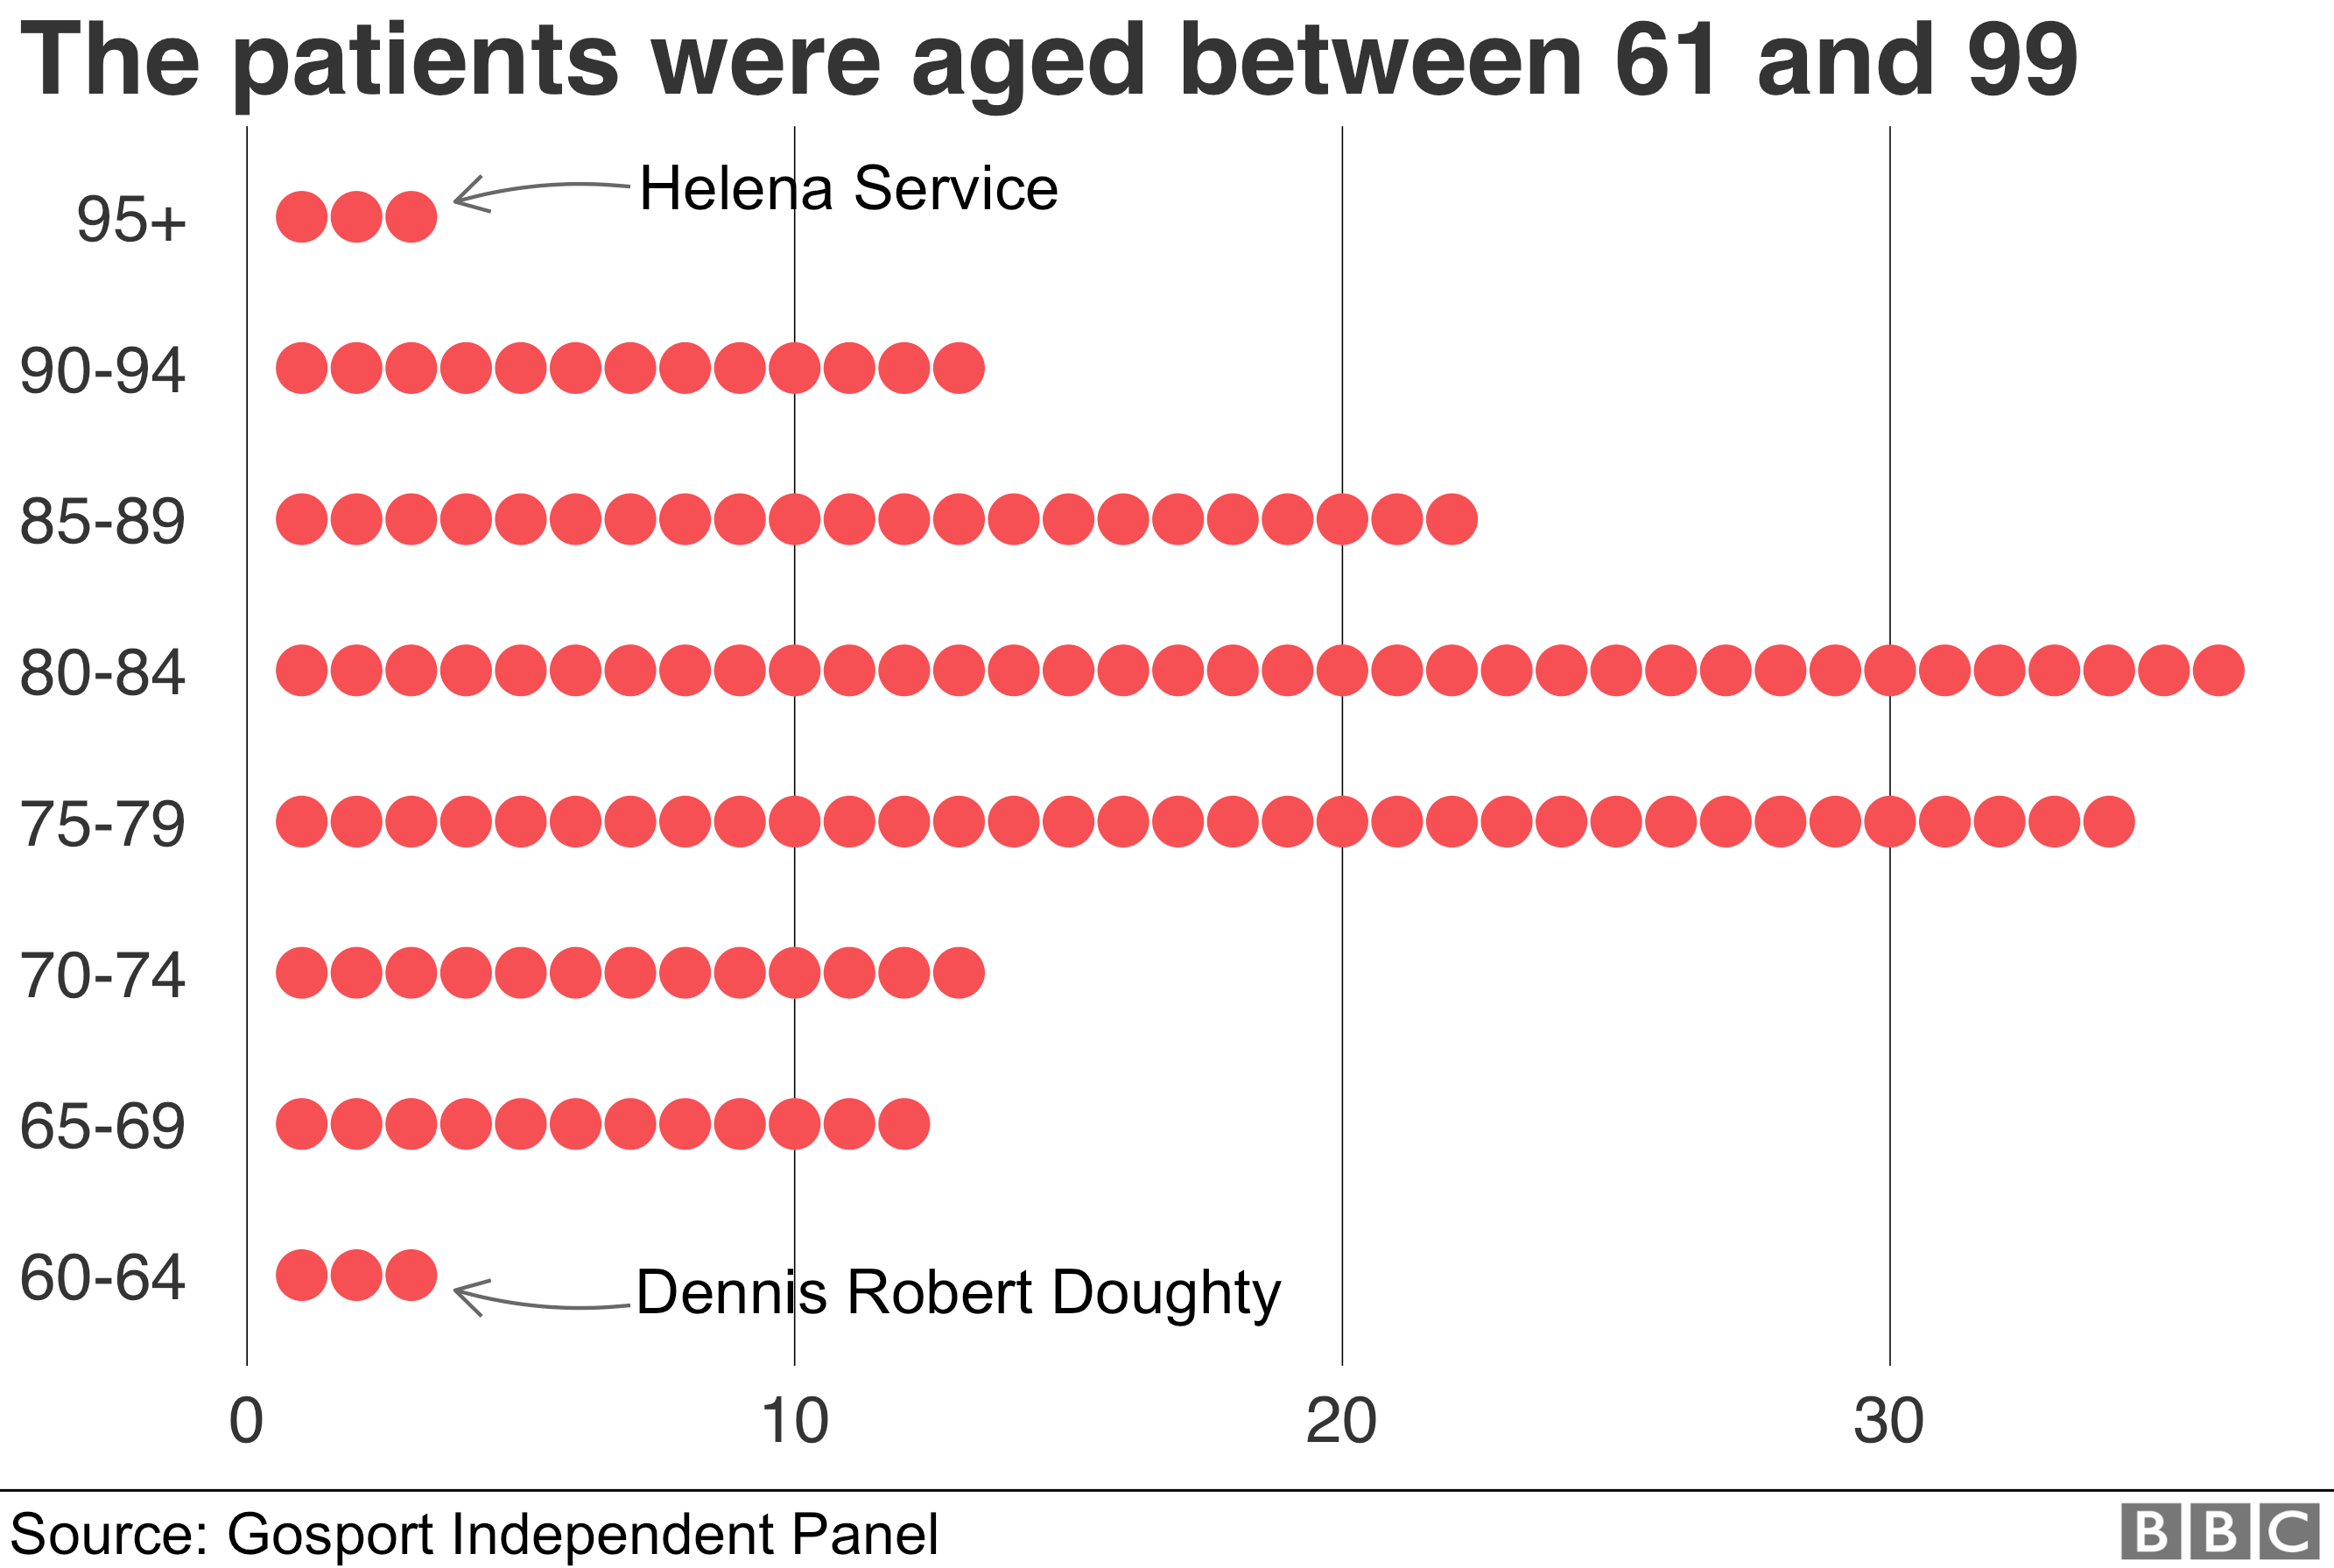 Chart showing the ages of the patients